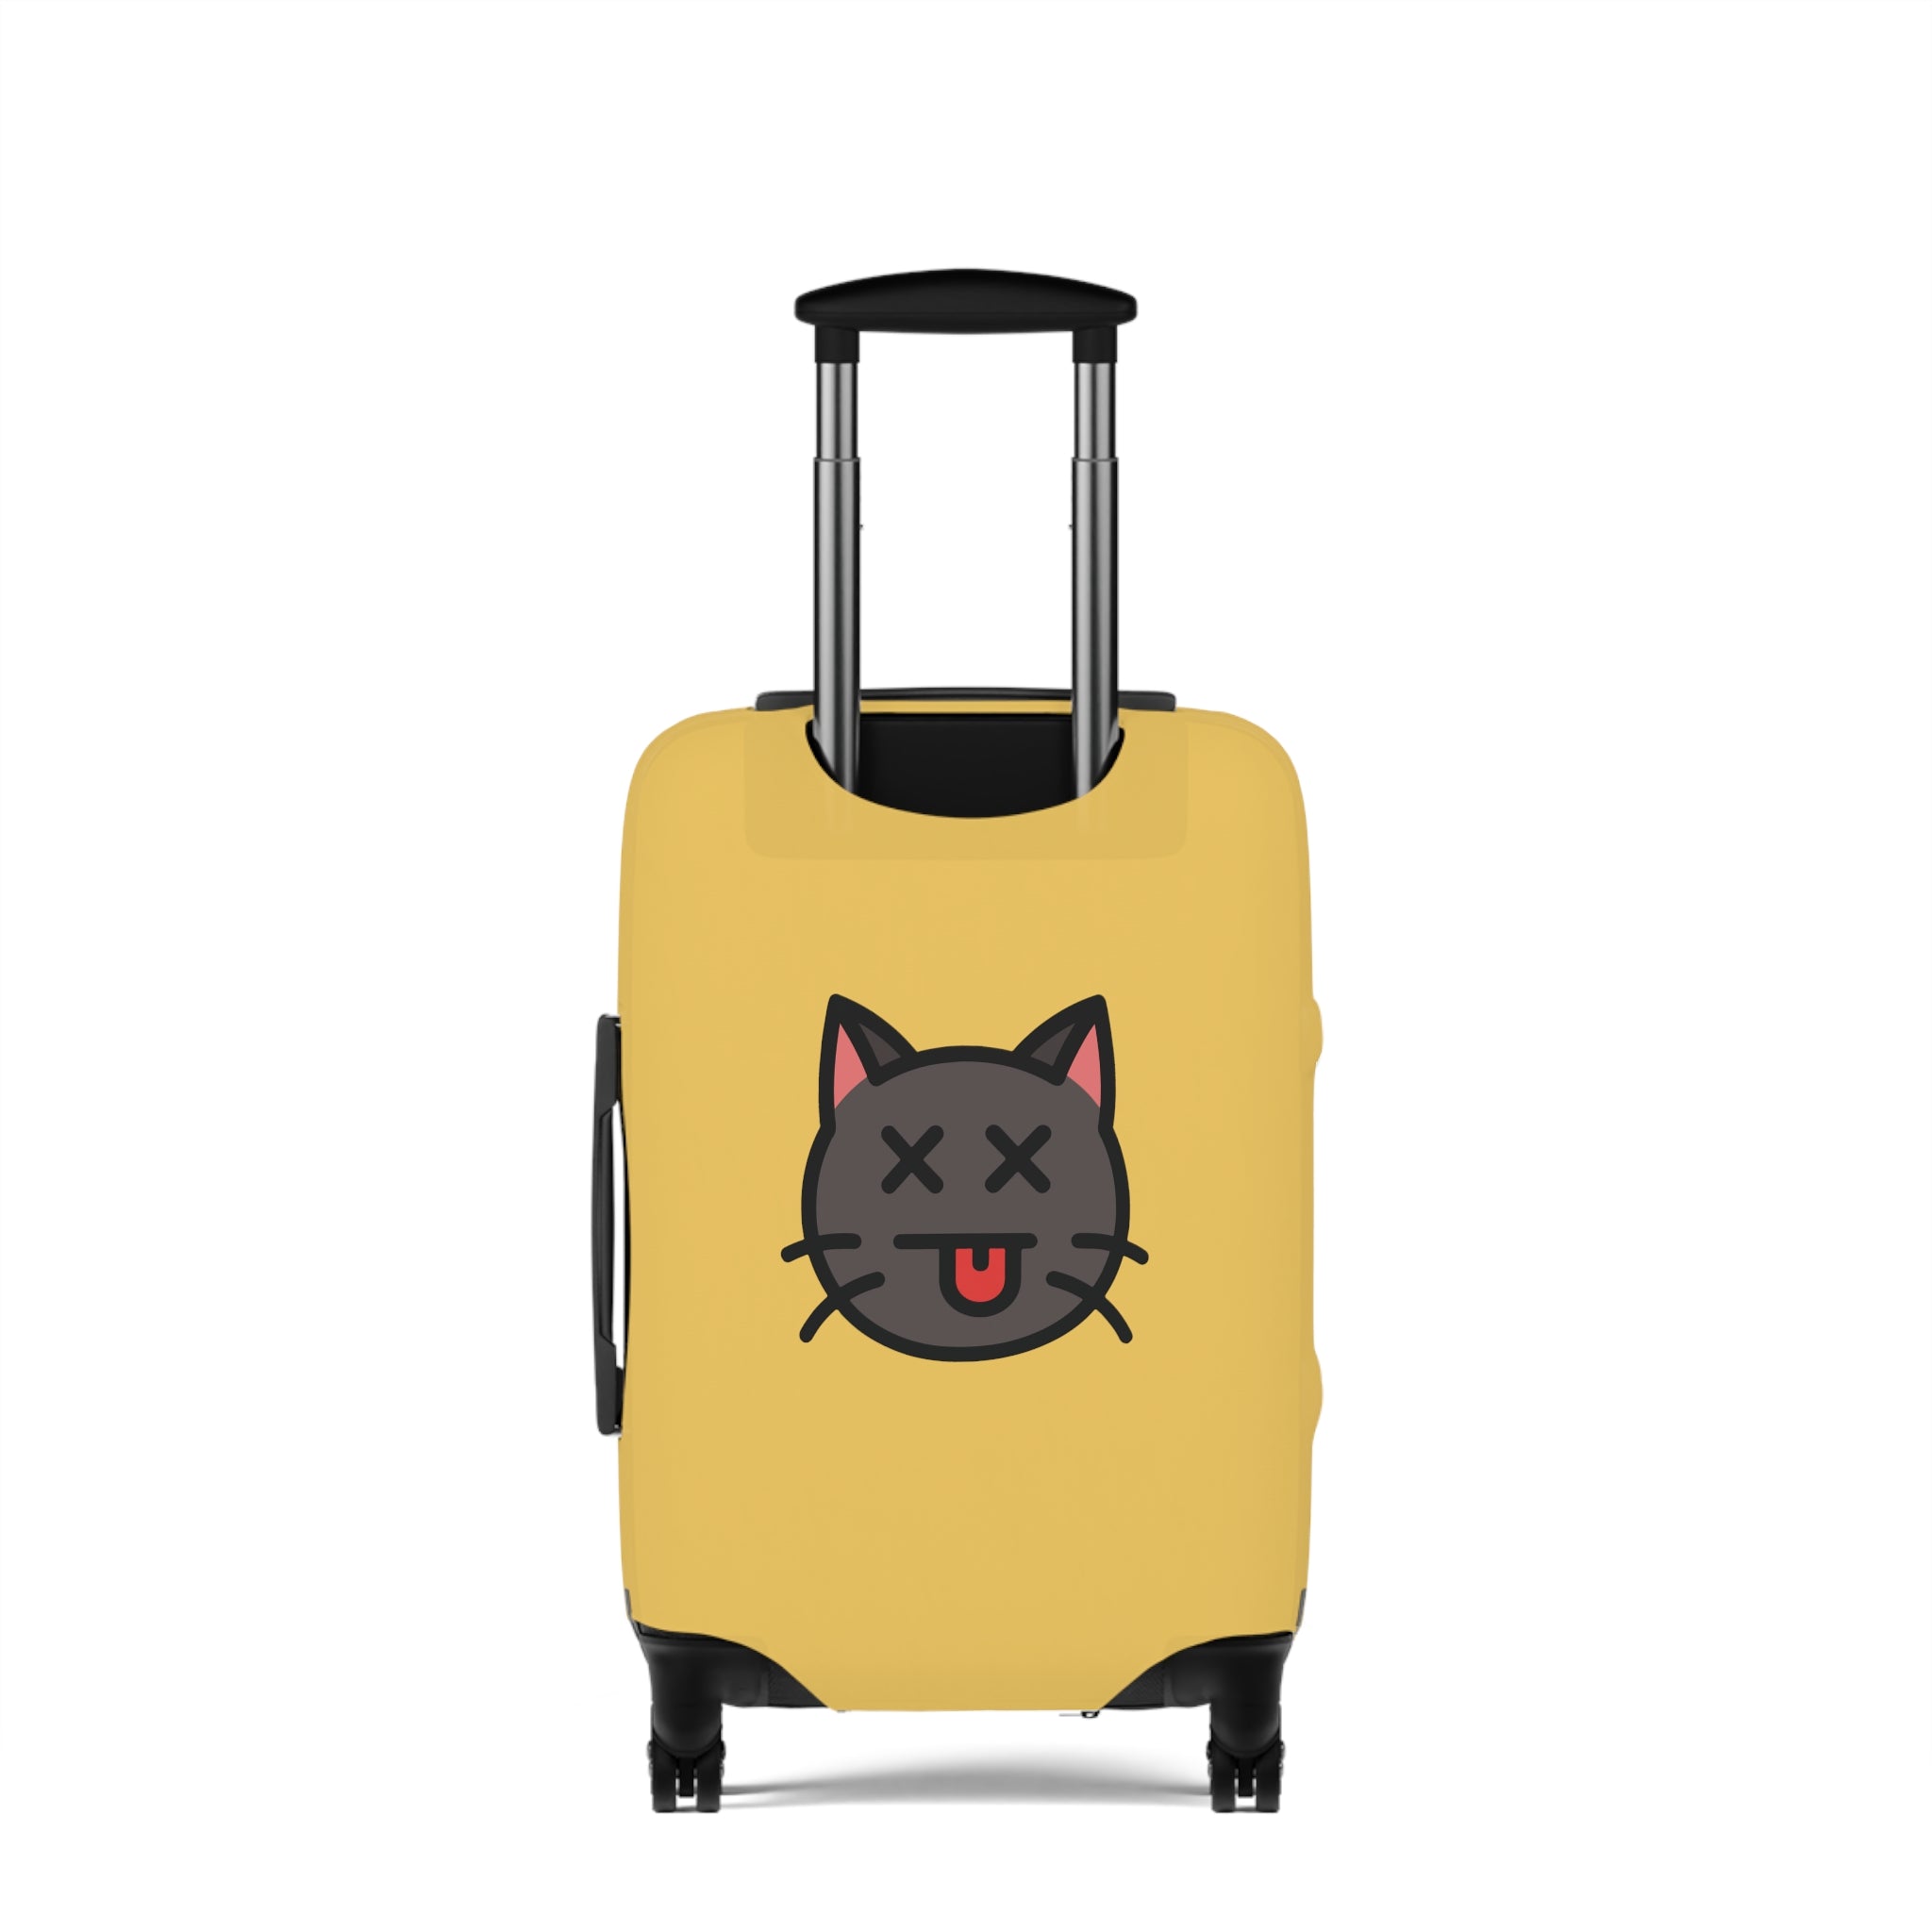 Emotional baggage Luggage Cover (Yellow)